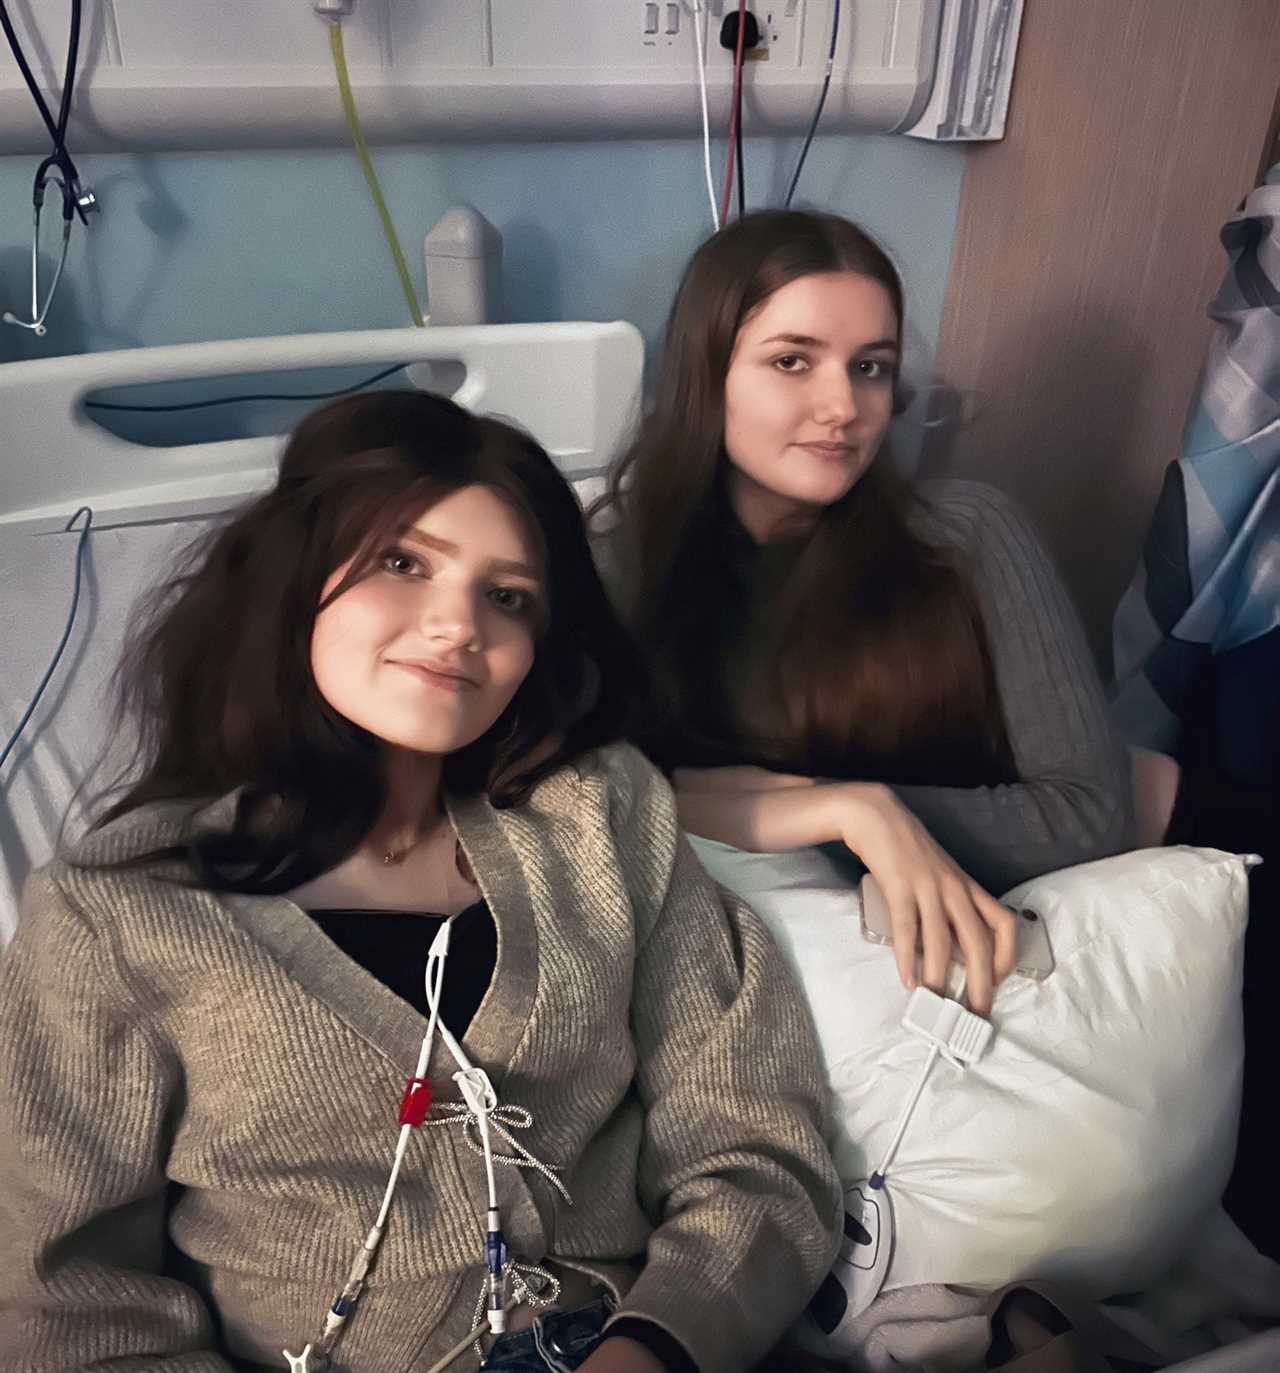 My twin girls were both struck by the same cancer symptoms – but only one of them is really sick